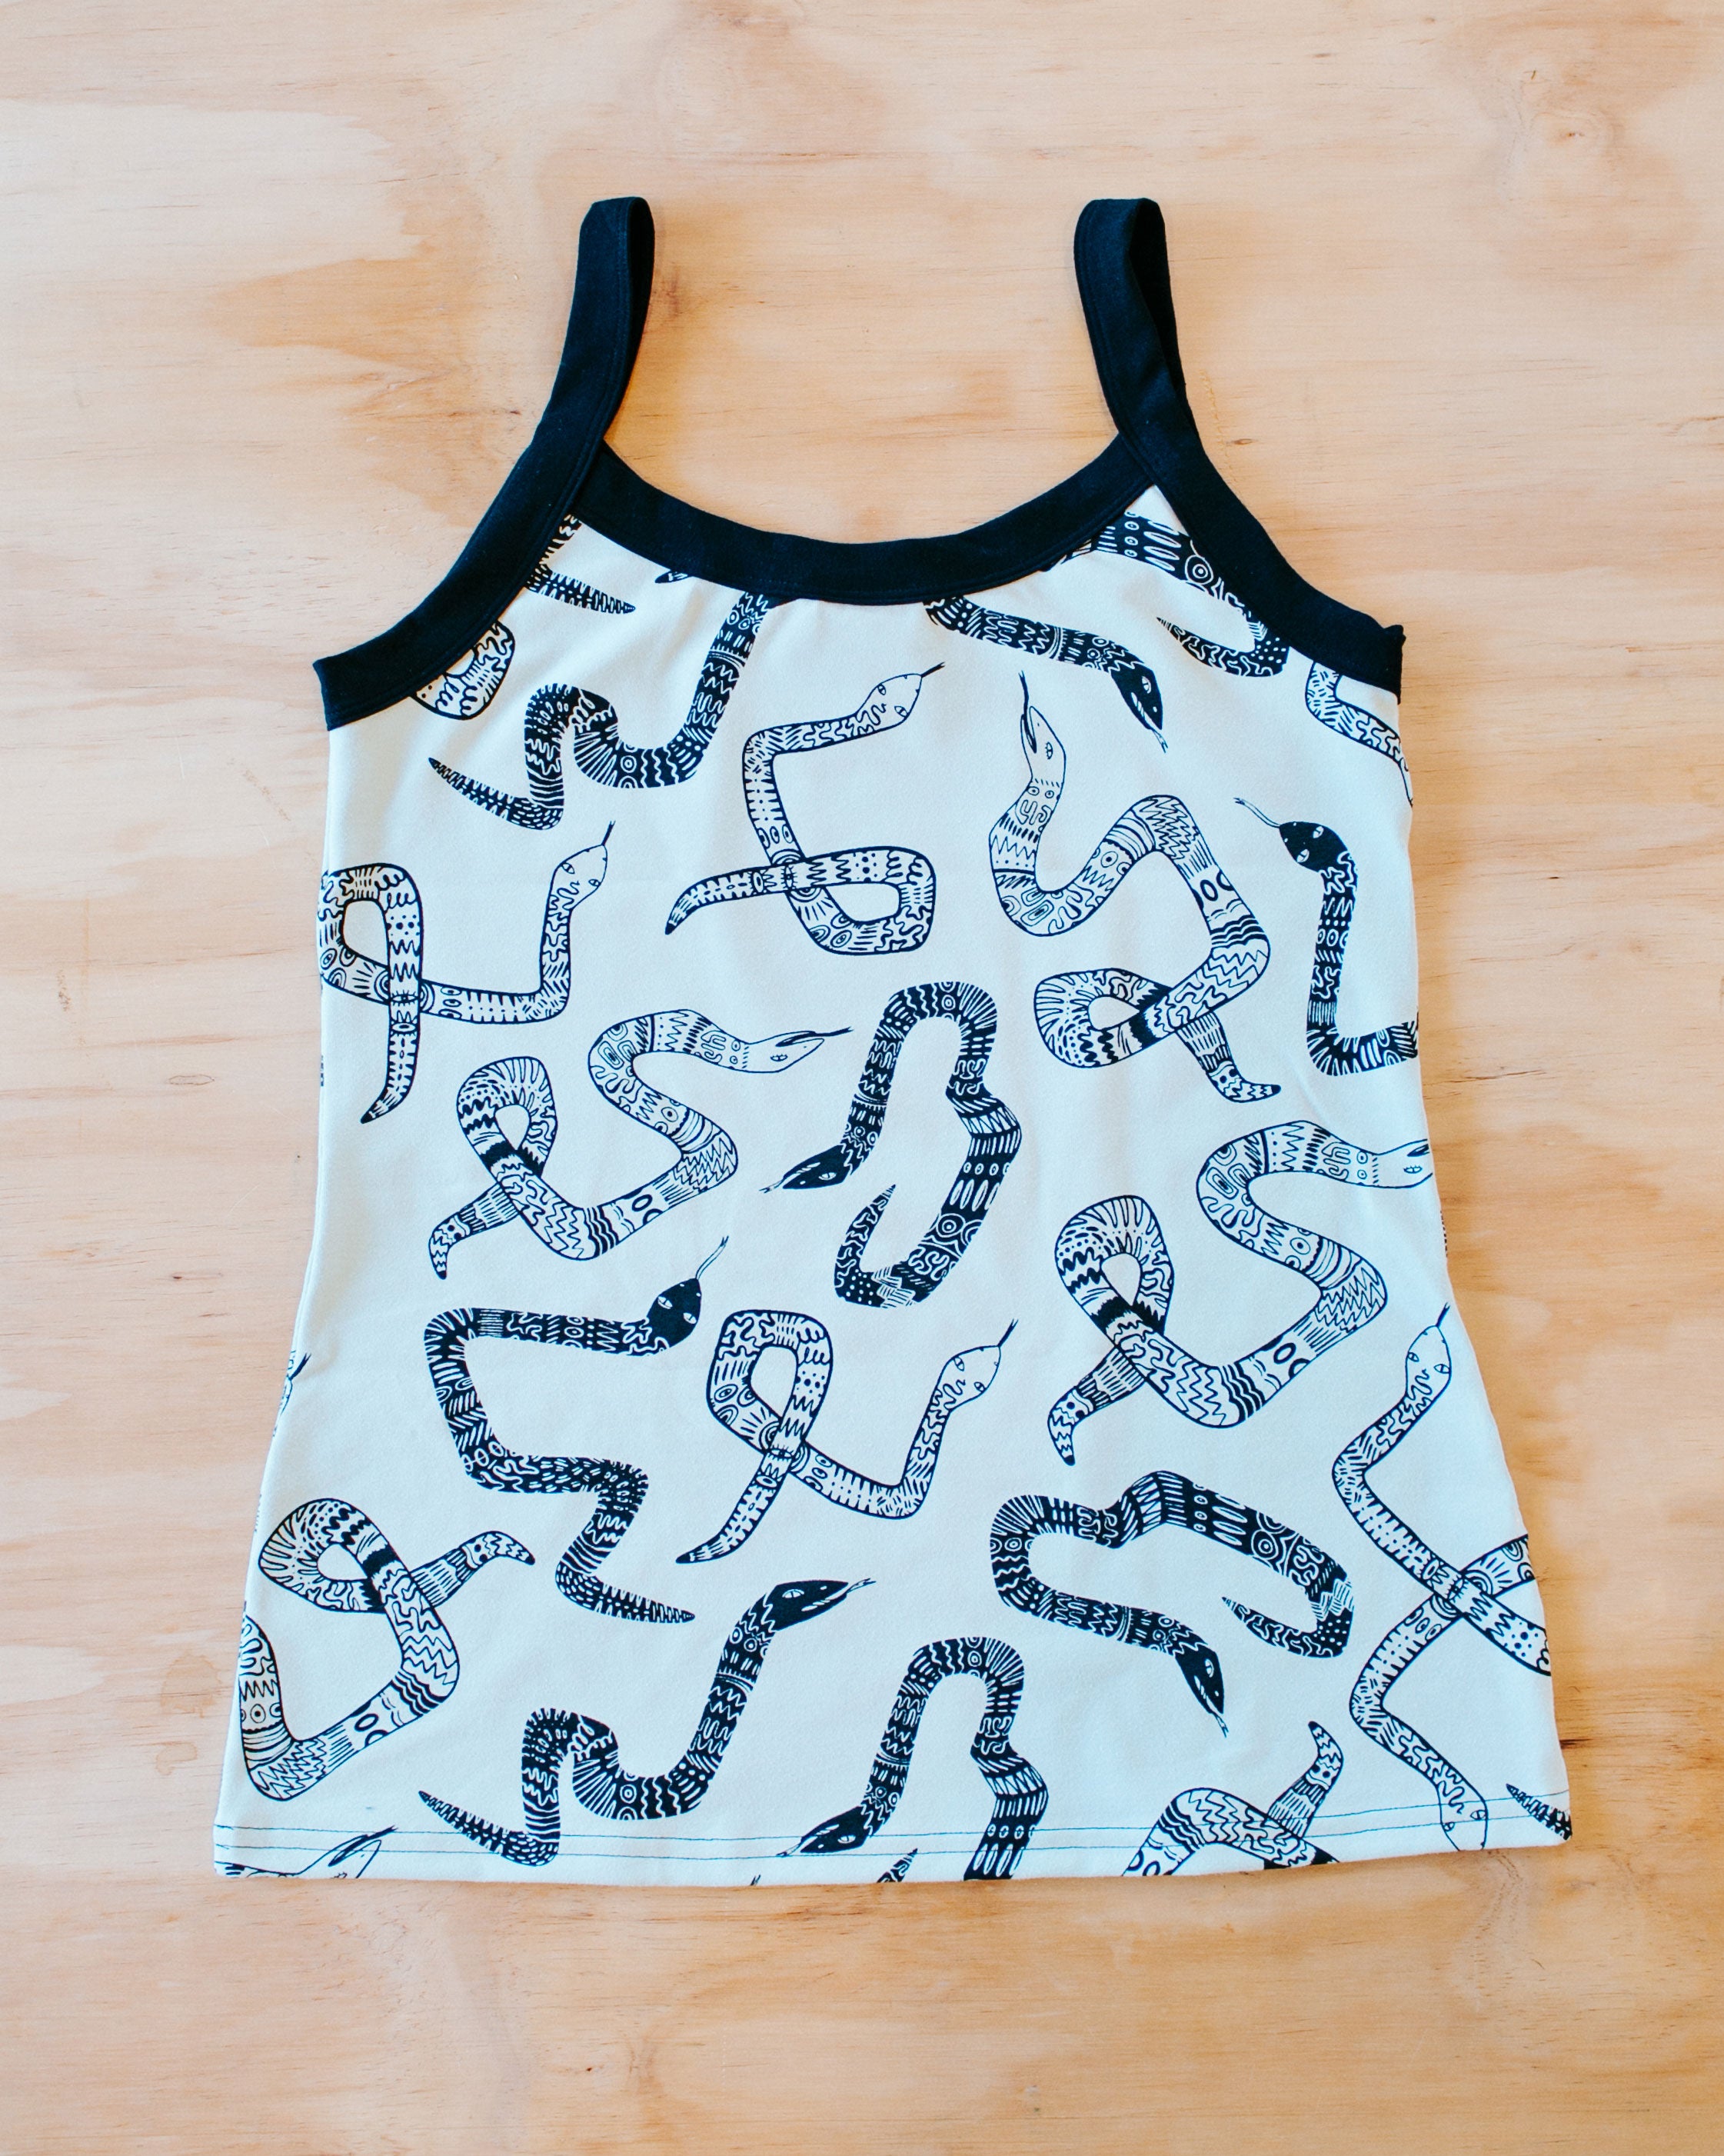 Flat lay of our Camisole in the Sketchy Snake pattern: dried sage color with black snakes and black binding.